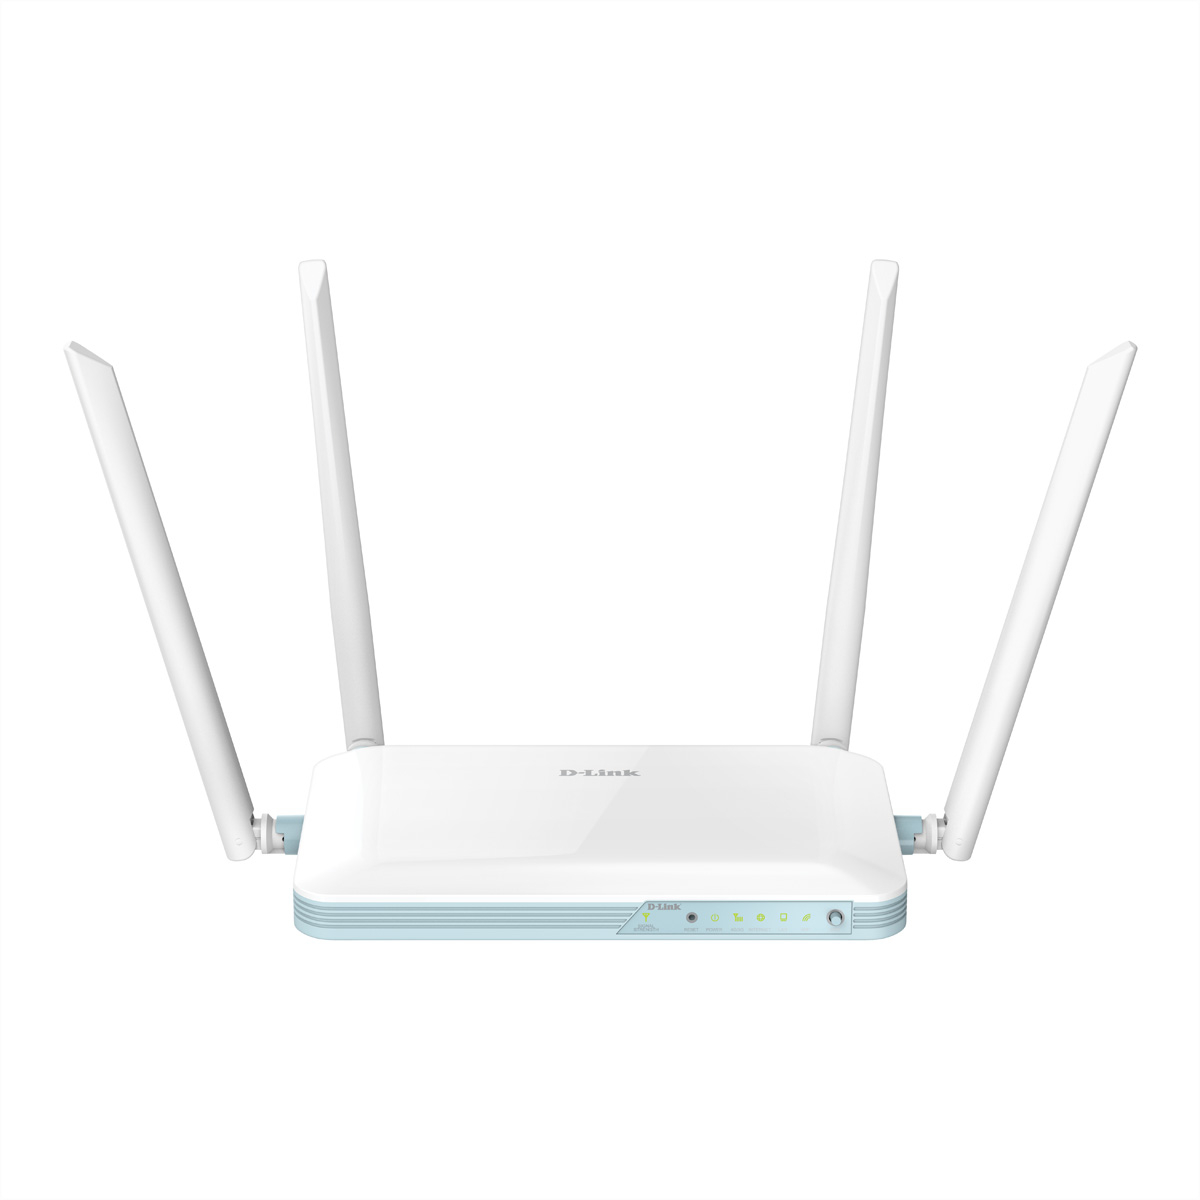 EAGLE PRO AI 4G SMART ROUTER N300  NMS IN WRLS